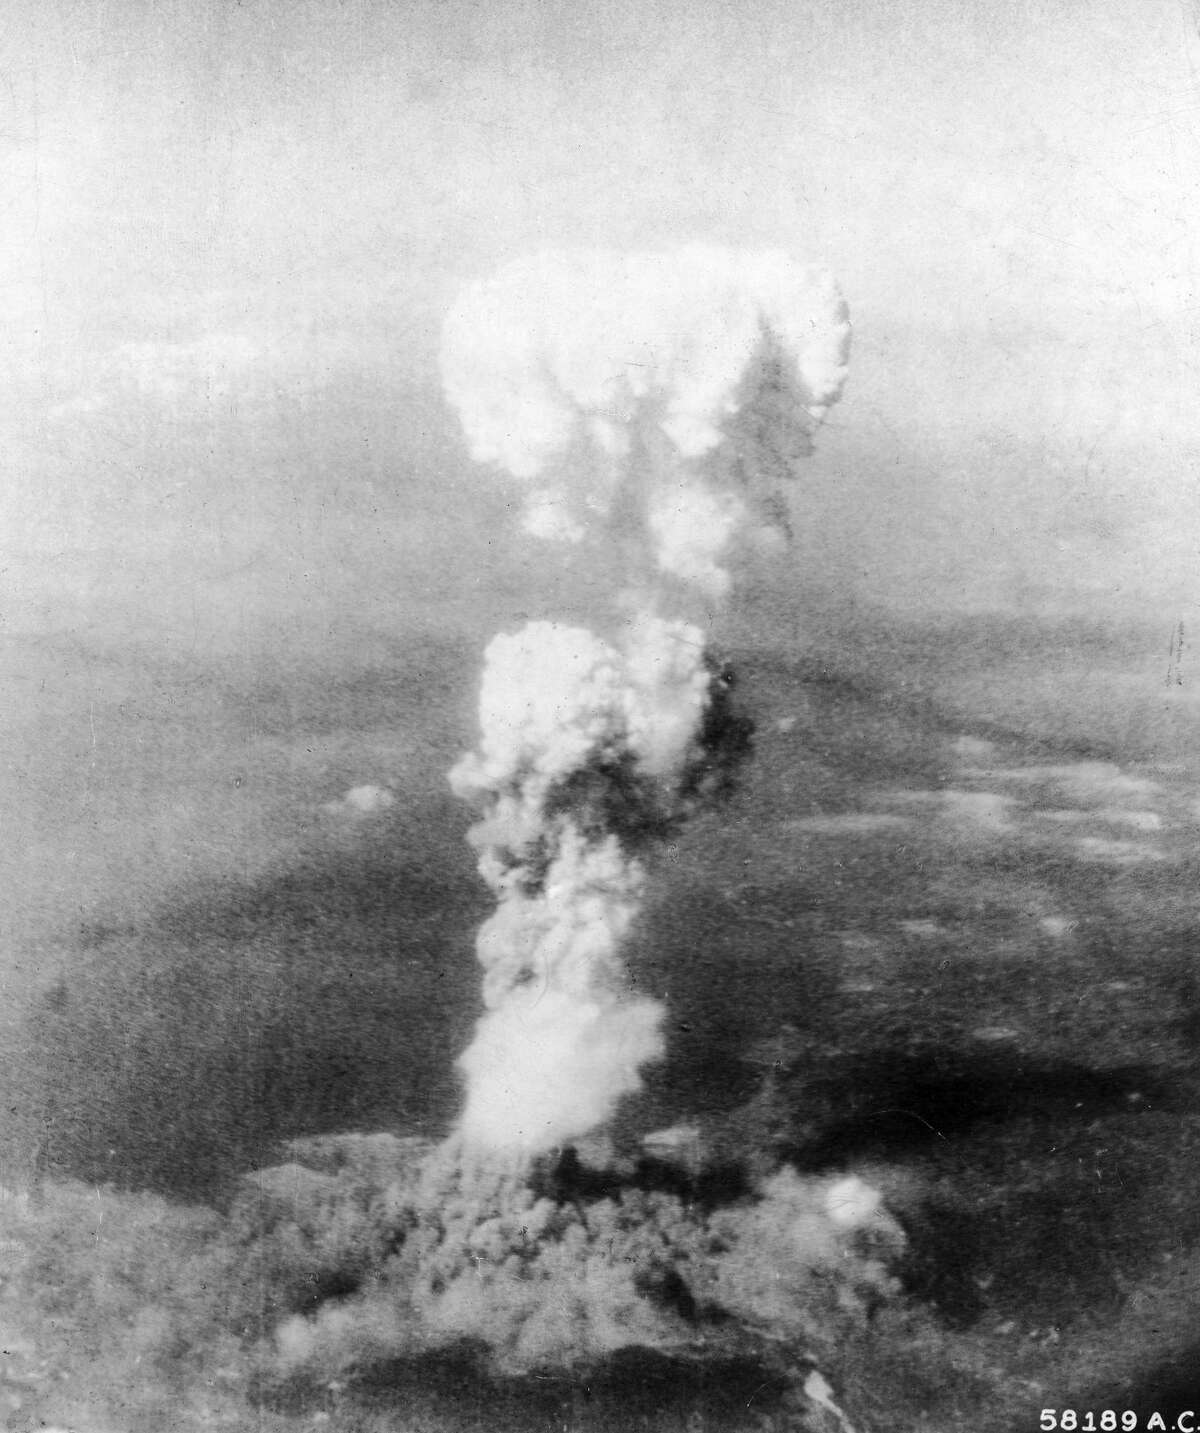 Aerial view of the mushroom cloud of smoke as it billows 20,000 ft. in the air, following the United States Air Force's detonation of an atomic bomb over the city of Hiroshima, Japan, August 6, 1945. (Photo by Time Life Pictures/US Army Air Force/The LIFE Picture Collection/Getty Images)